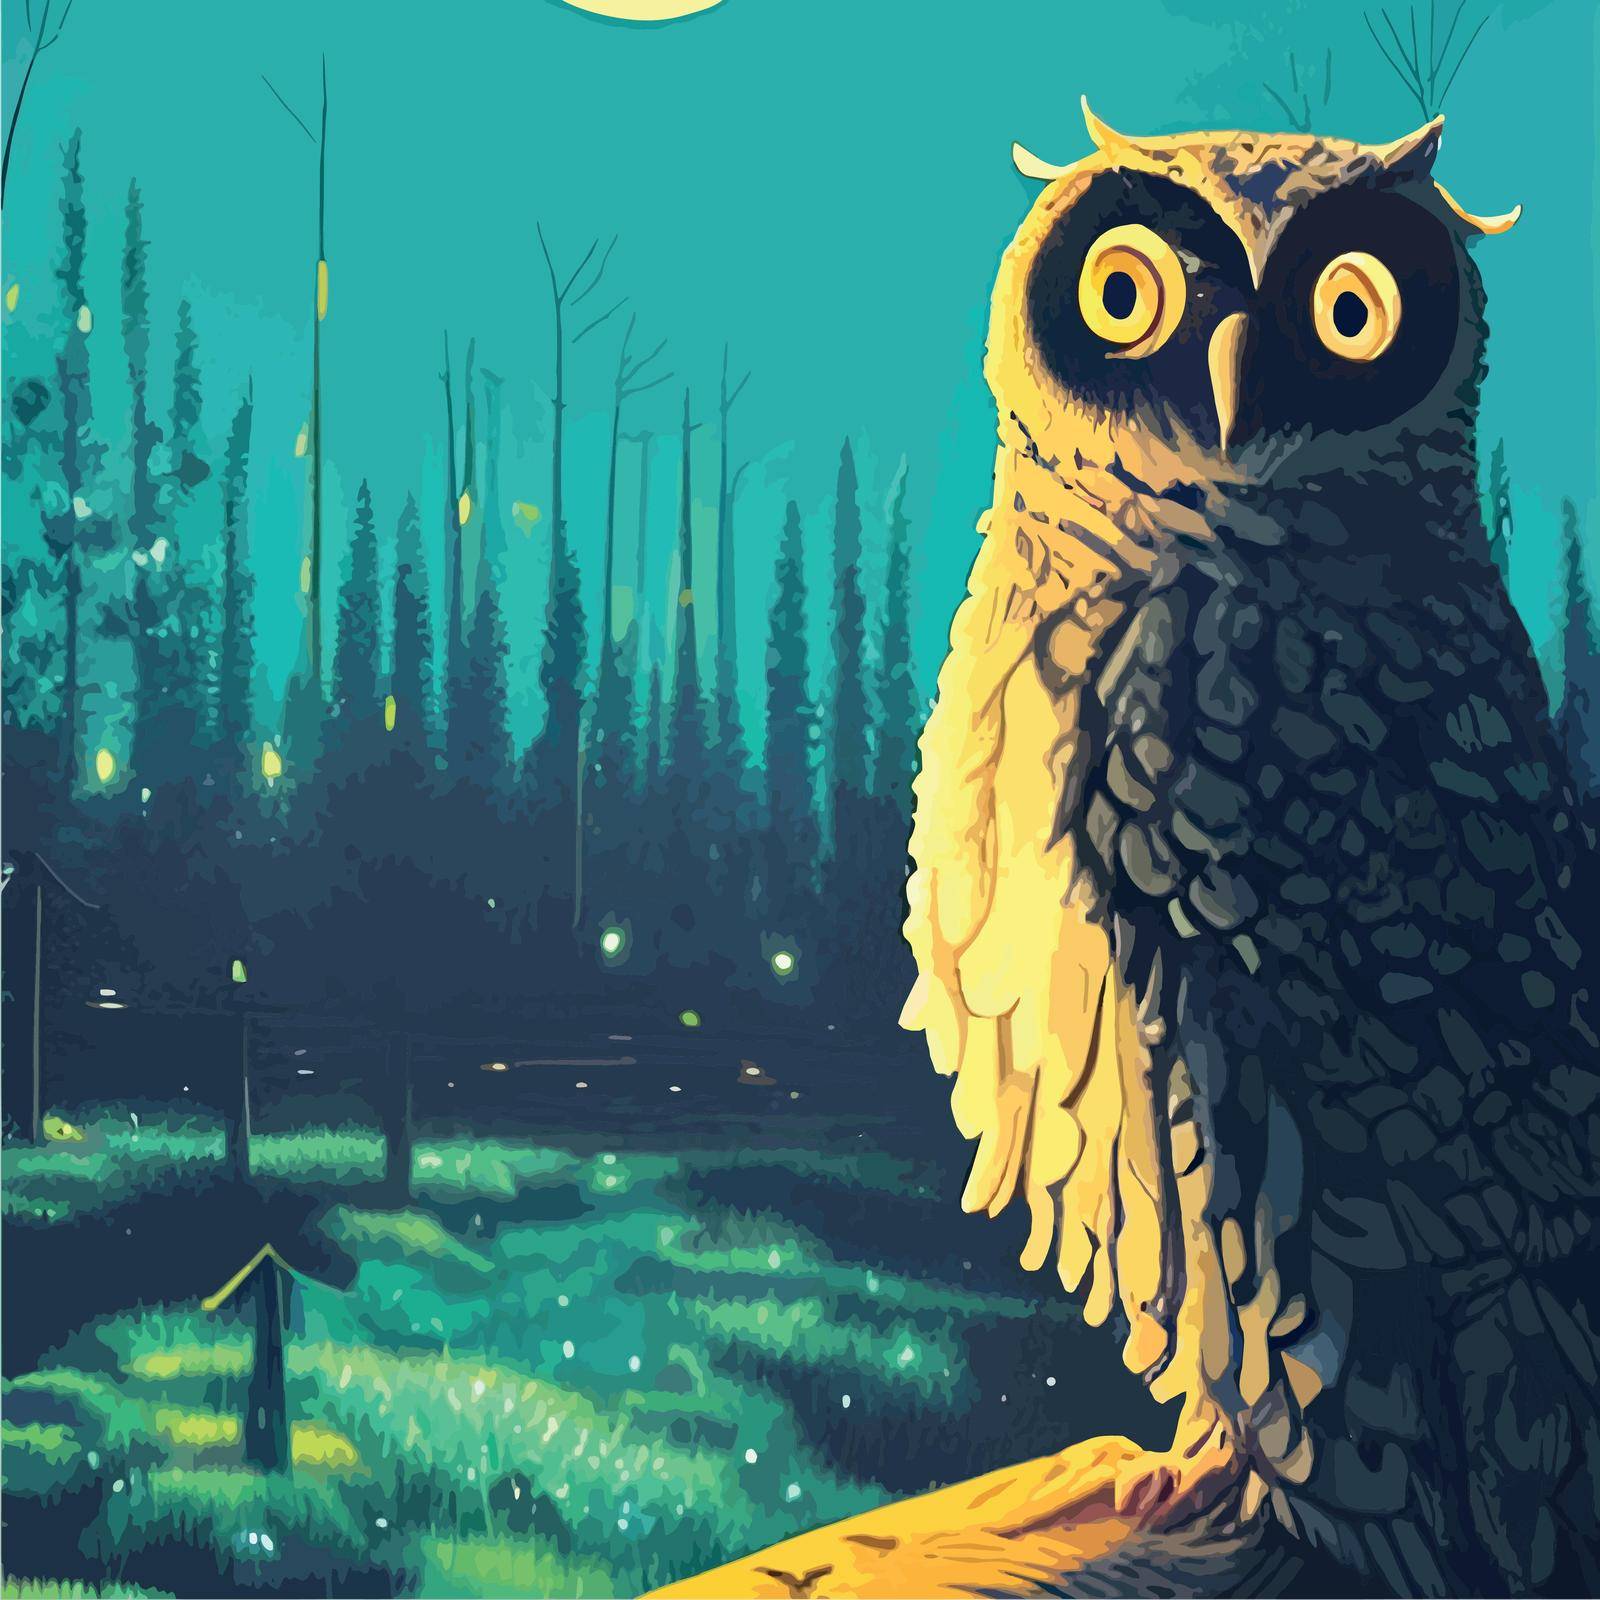 cartoon illustration owl sitting forest under full moon. vertical vector illustration. owl sits branch looks seriously wisely. Fairy forest looks magical. Beautiful powerful bird forest suitable